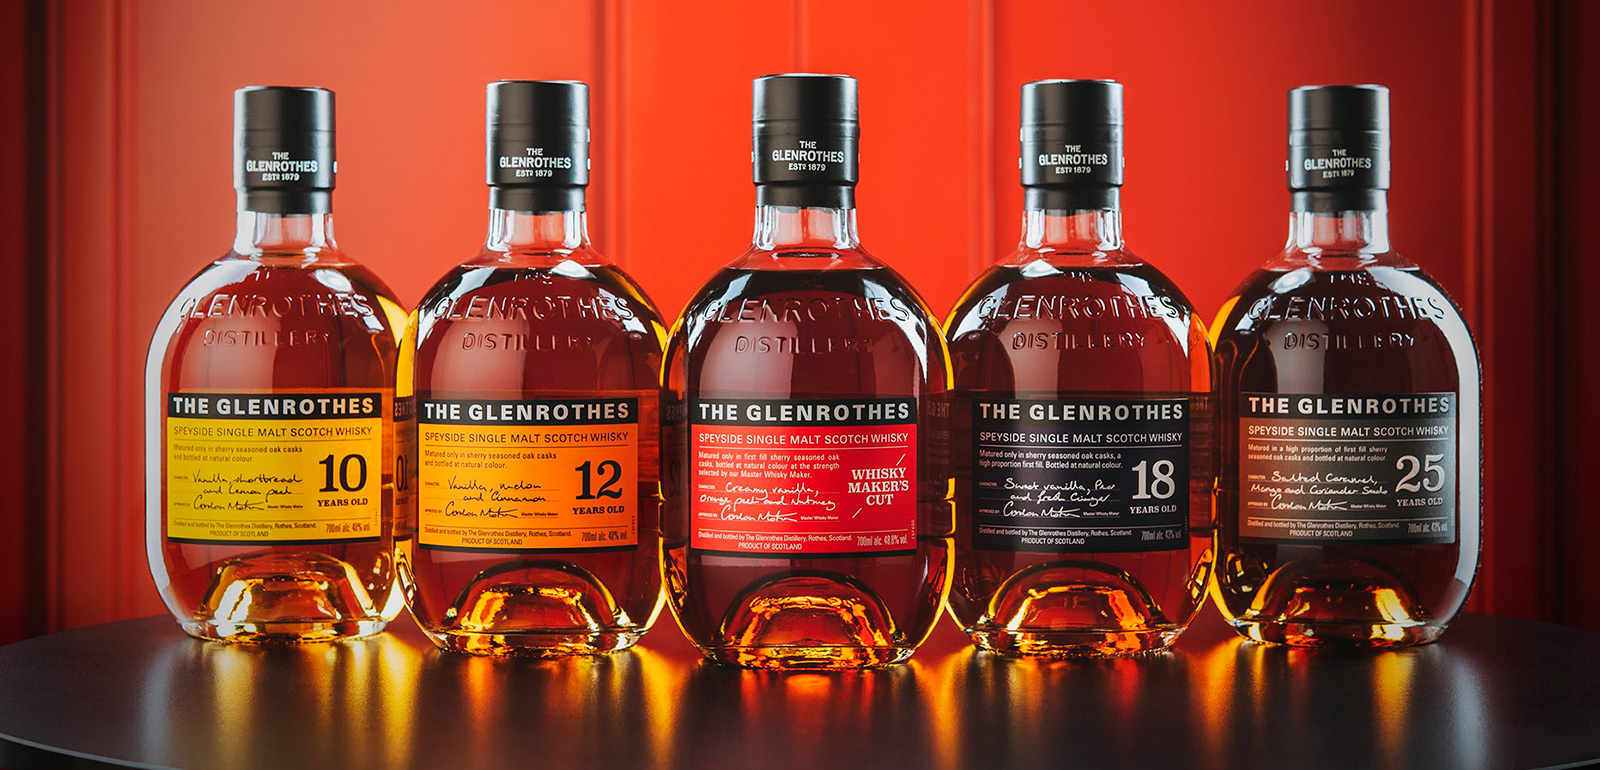 Glenrothes Soleo Collection